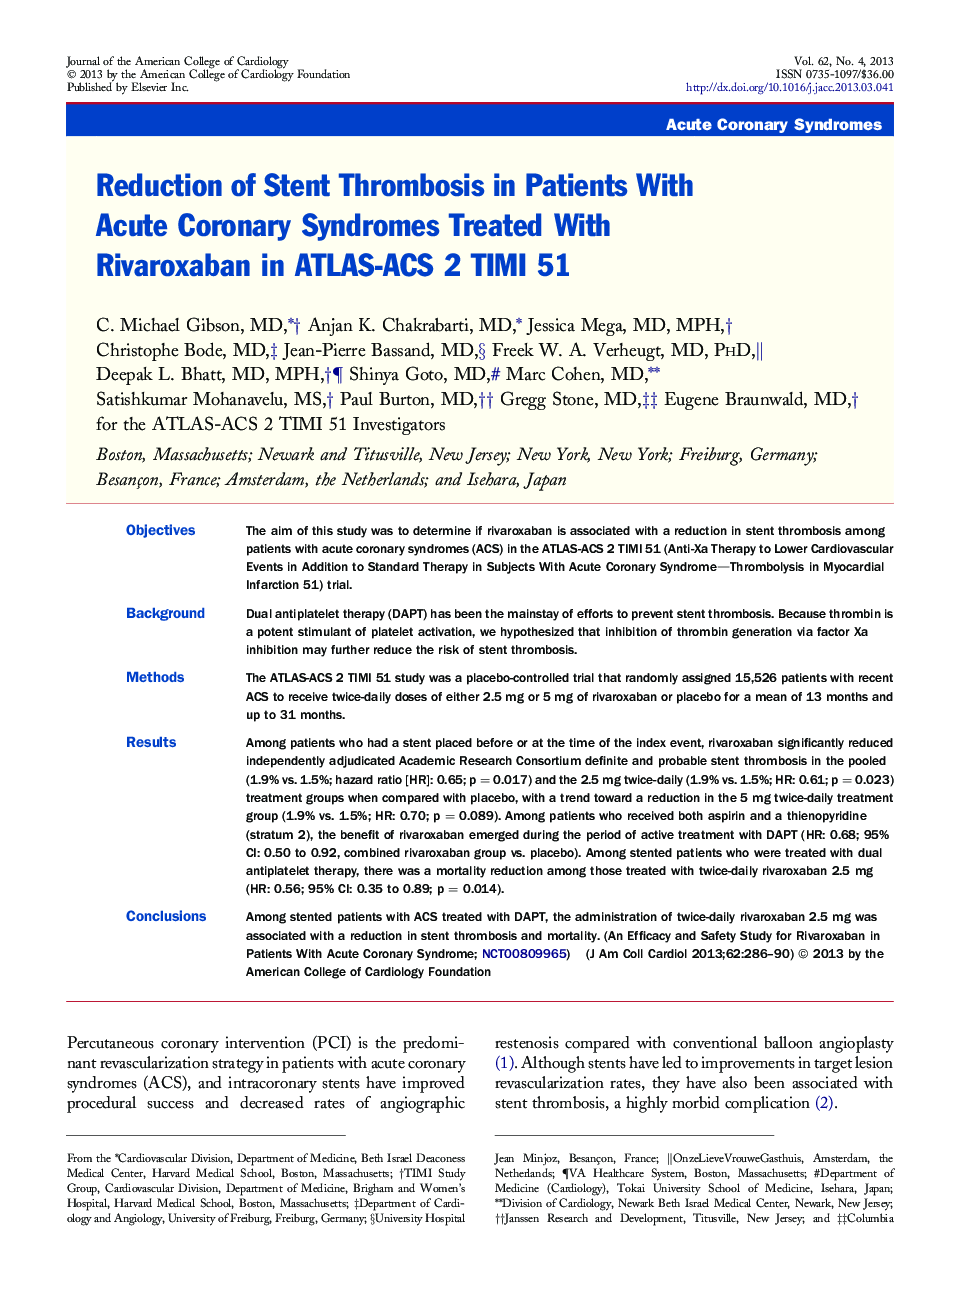 Reduction of Stent Thrombosis in Patients With Acute Coronary Syndromes Treated With Rivaroxaban in ATLAS-ACS 2 TIMI 51 